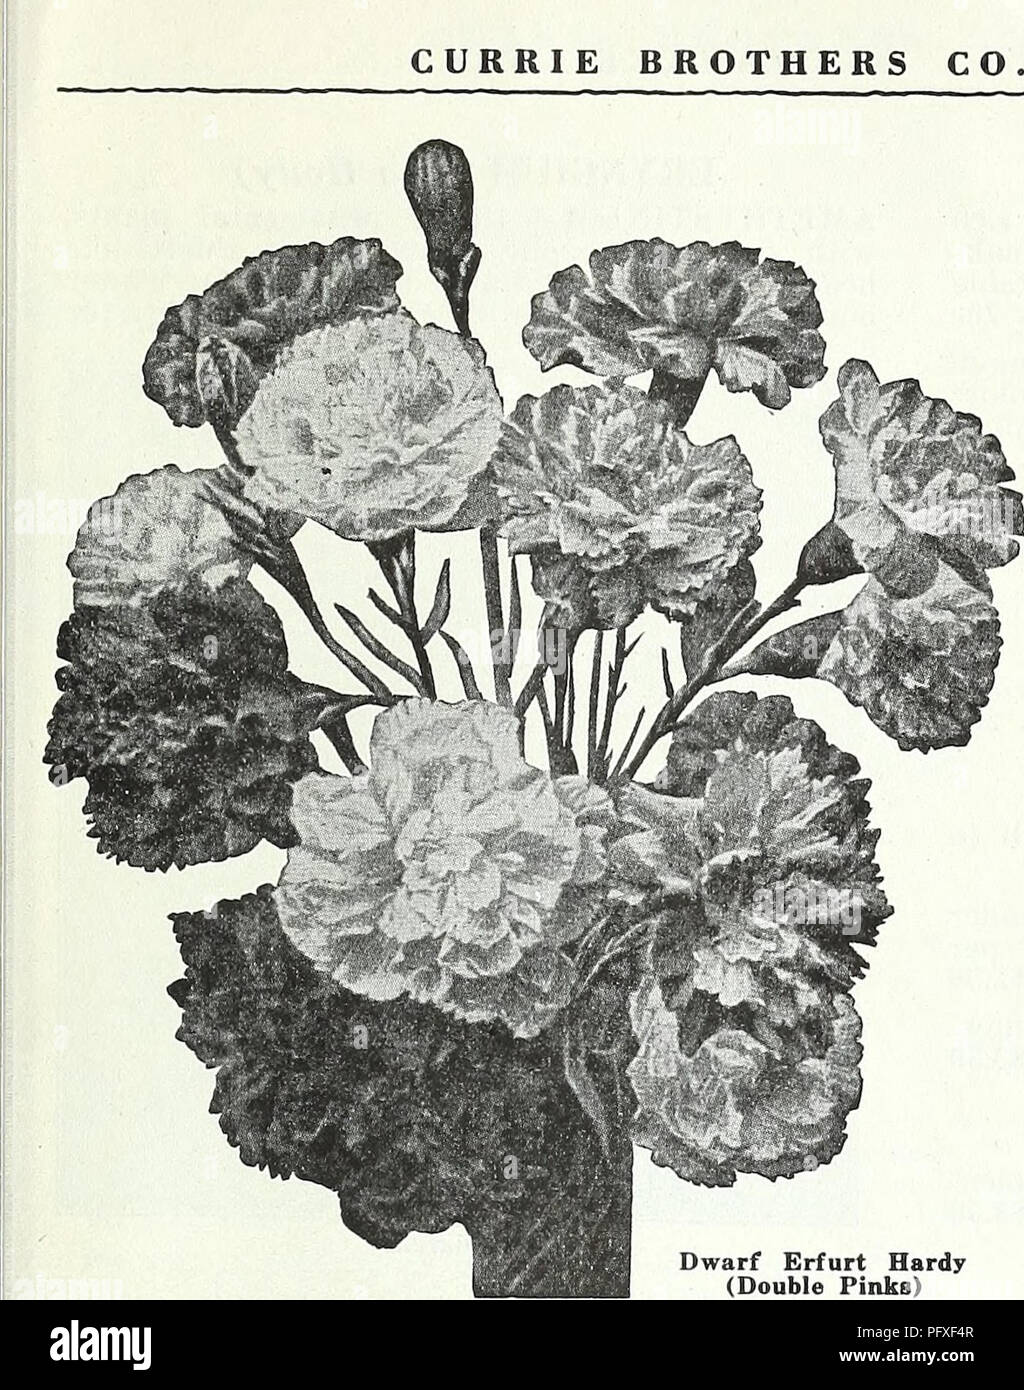 . Currie's garden annual : 62nd year spring 1937. Flowers Seeds Catalogs; Bulbs (Plants) Seeds Catalogs; Vegetables Seeds Catalogs; Nurseries (Horticulture) Catalogs; Plants, Ornamental Catalogs; Gardening Equipment and supplies Catalogs. CURRIE BROTHERS. MILWAUKEE, WIS Page 47 DIANTHUS GARDEN PINKS These low-growing early-flowering hardy pinks are especially desirable for the edges of herbaceous borders, where they can remain undisturbed for many years. The flowers have a de- licious, spicy fragrance, fine for cutting. CAESIUS (Cheddar Pink)—Forms compact cushions of glaucous leaves and sweet Stock Photo